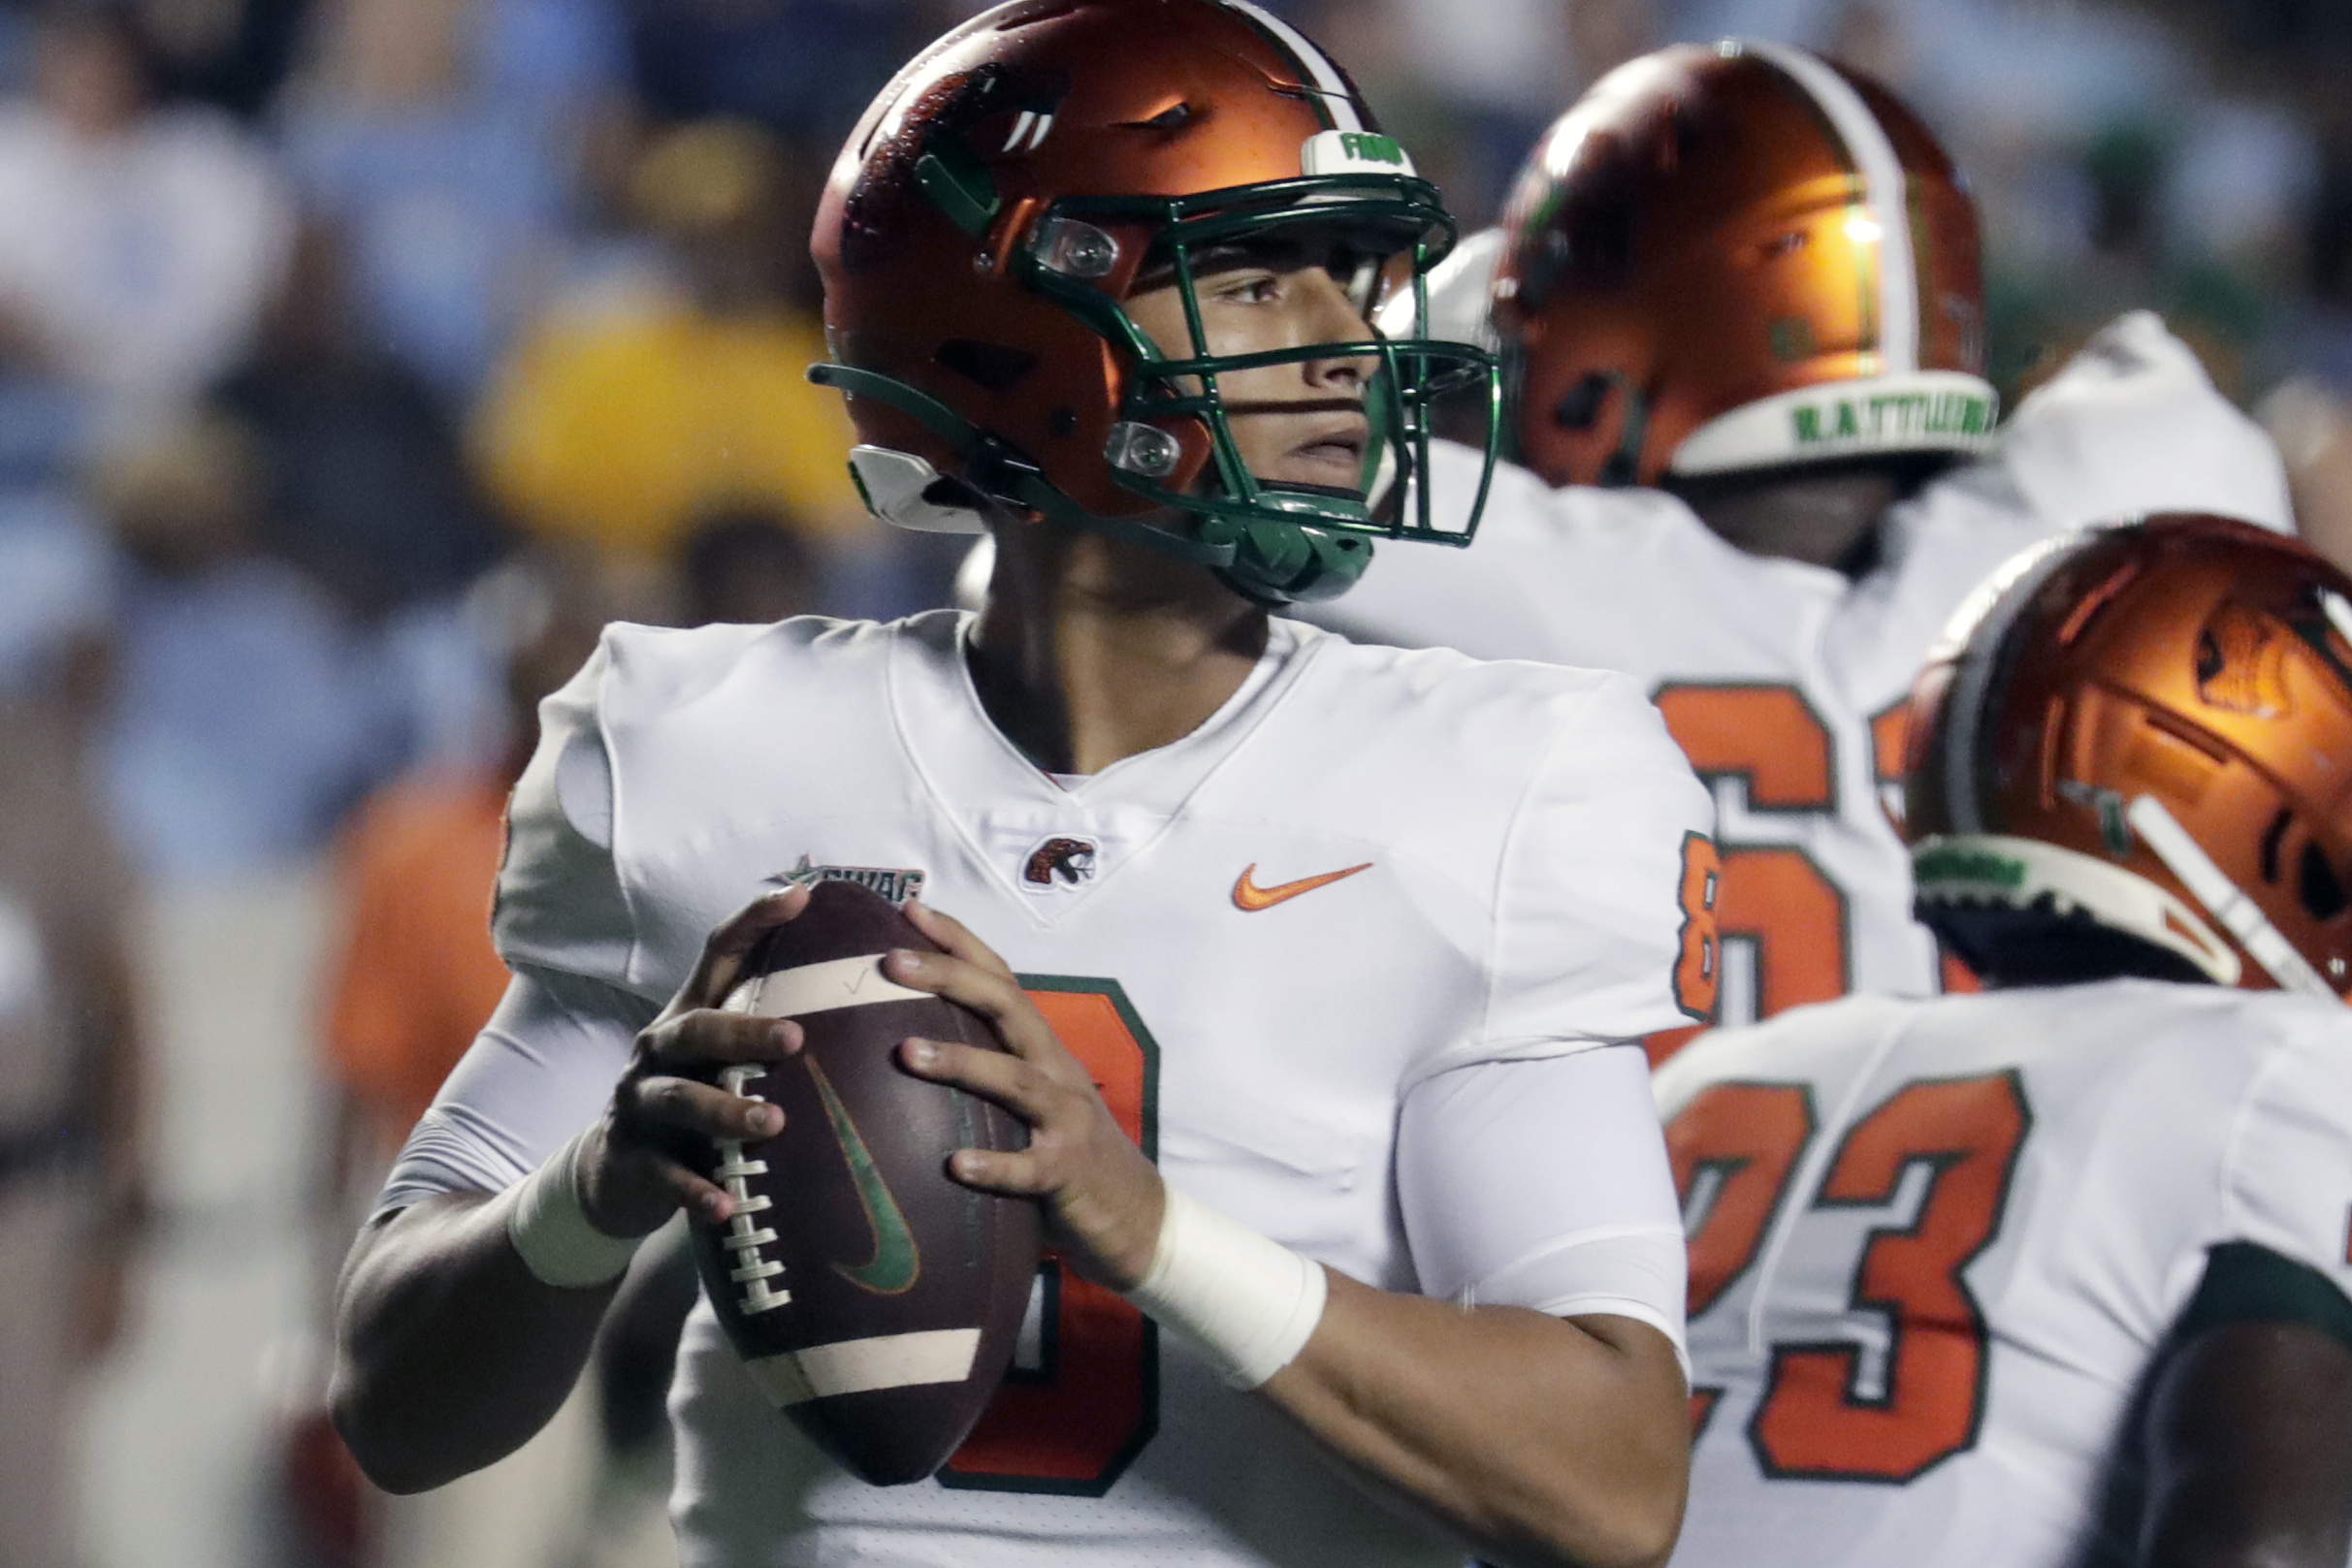 Miami Hurricanes Football Uniforms Made From Ocean Waste